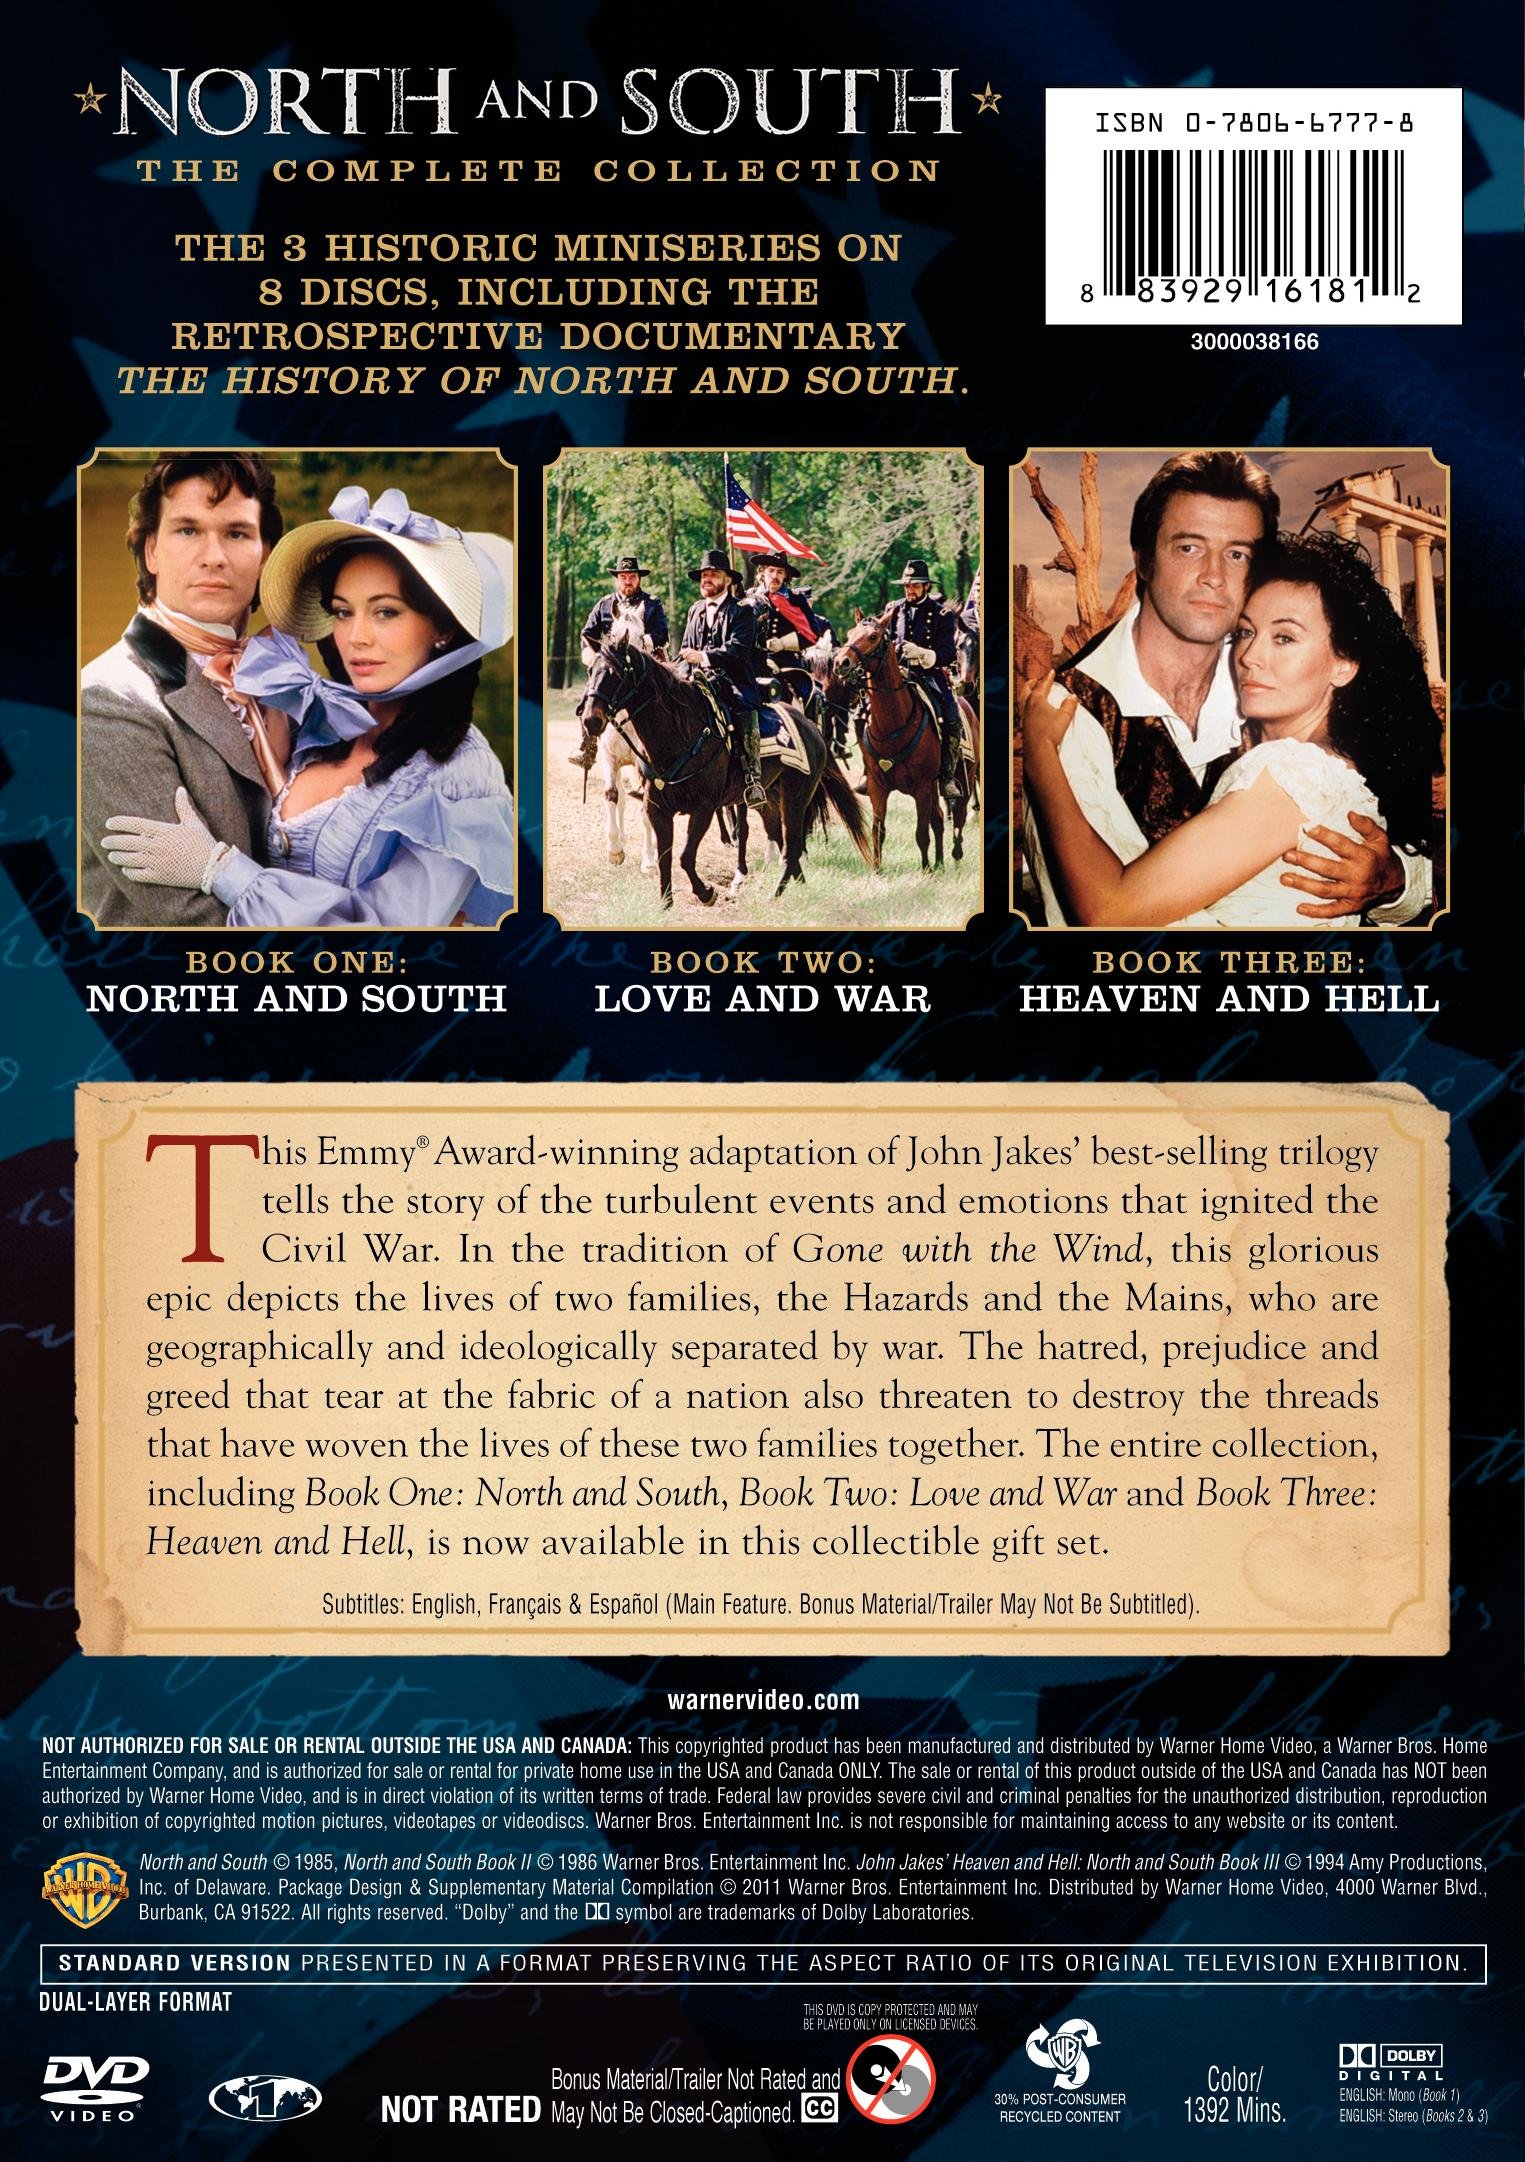 North And South: The Complete Collection (DVD) - image 3 of 5